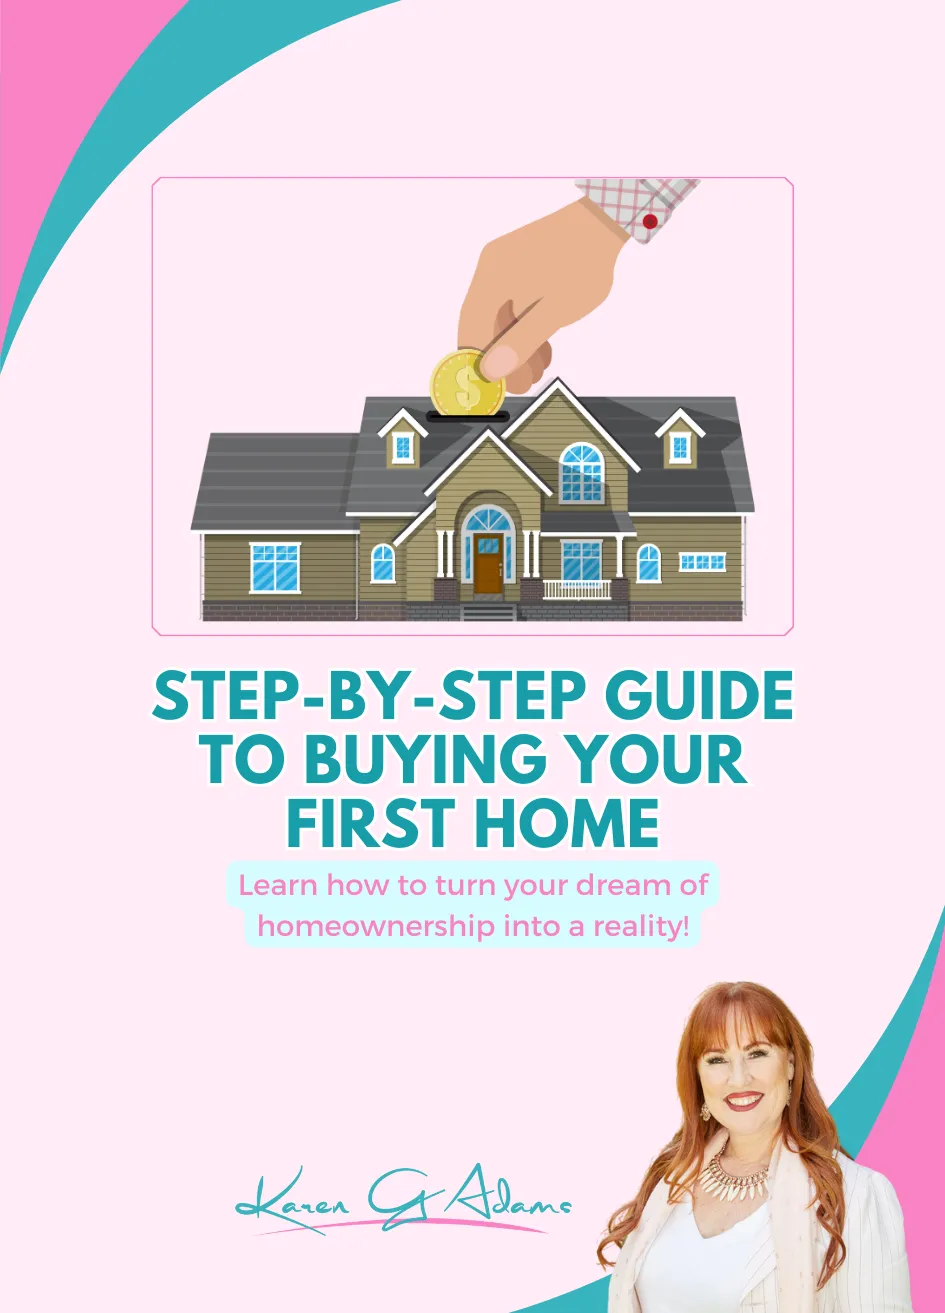 Step-by-Step Guide to Buying Your First Home by Karen G Adams of Financial Management 101